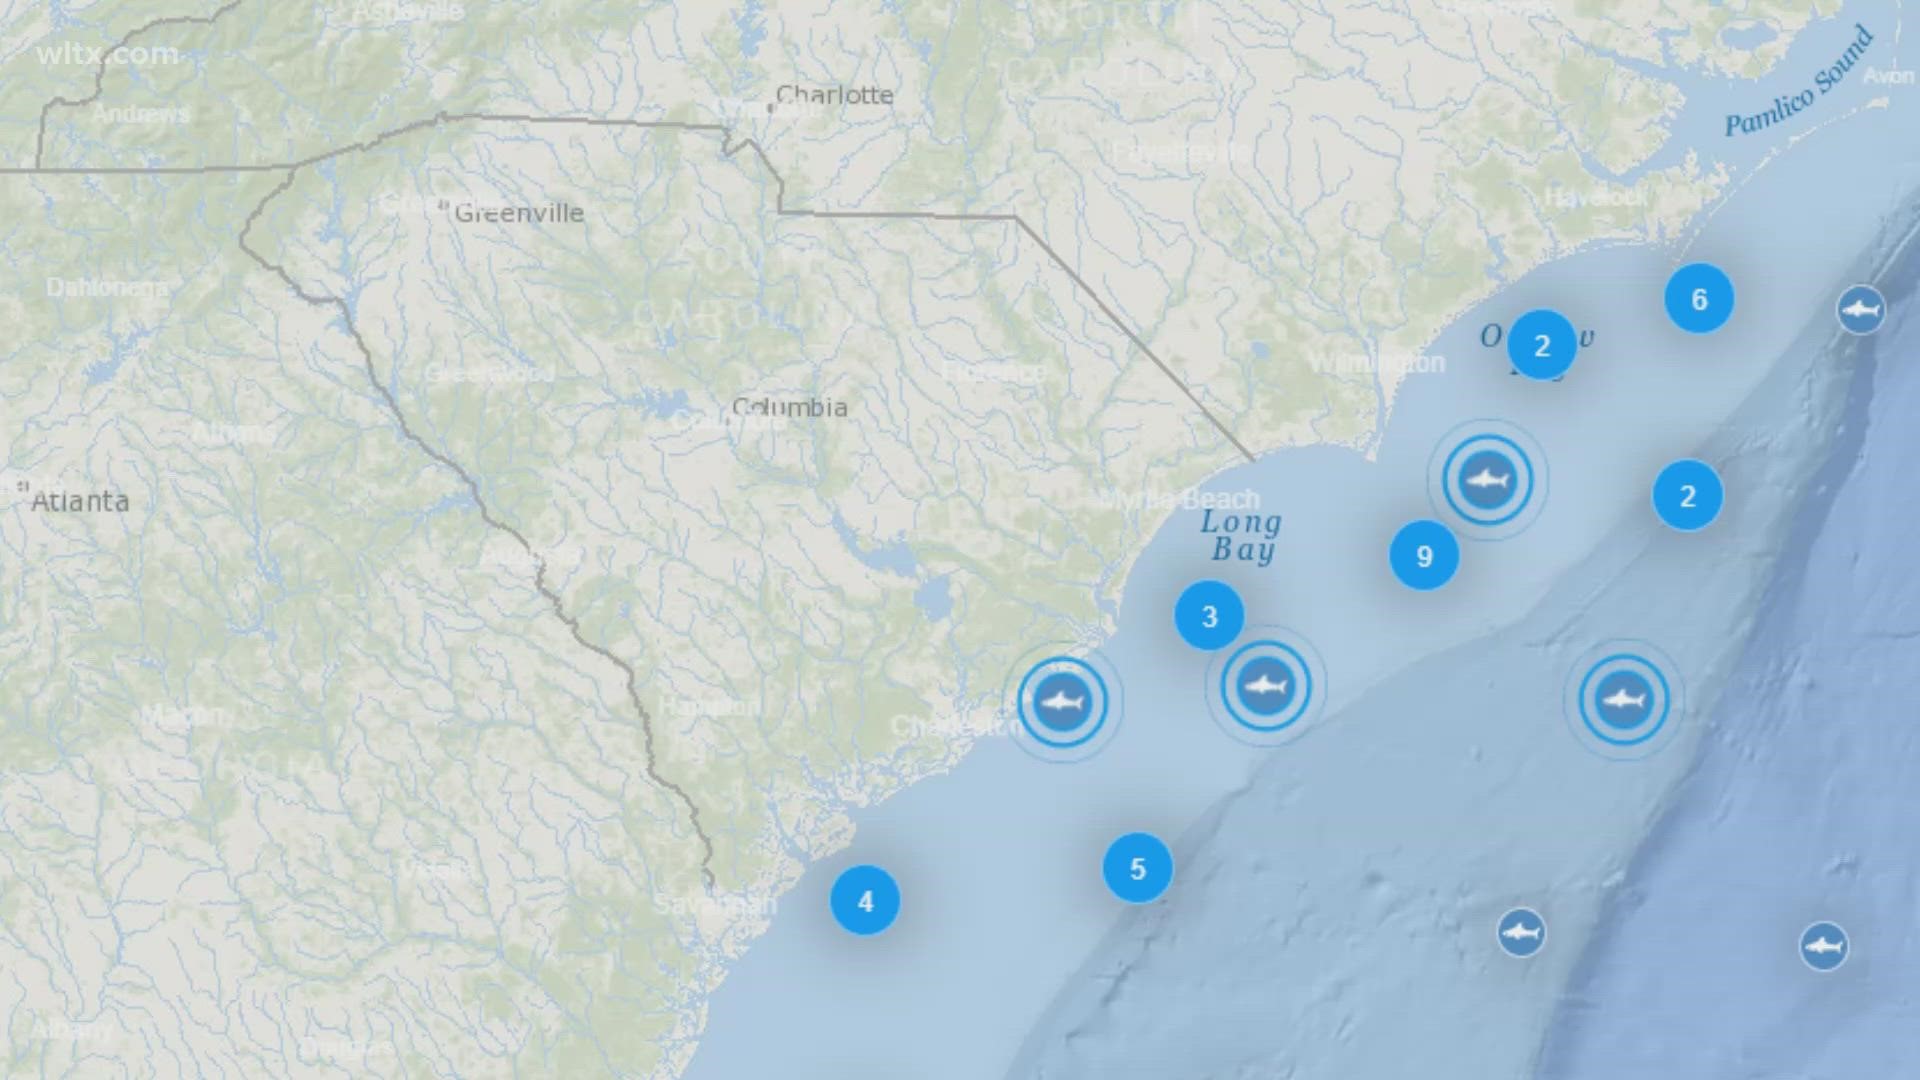 Satellite tracking shows large great white sharks are gathering off the coast of SC between Charleston and North Carolina.